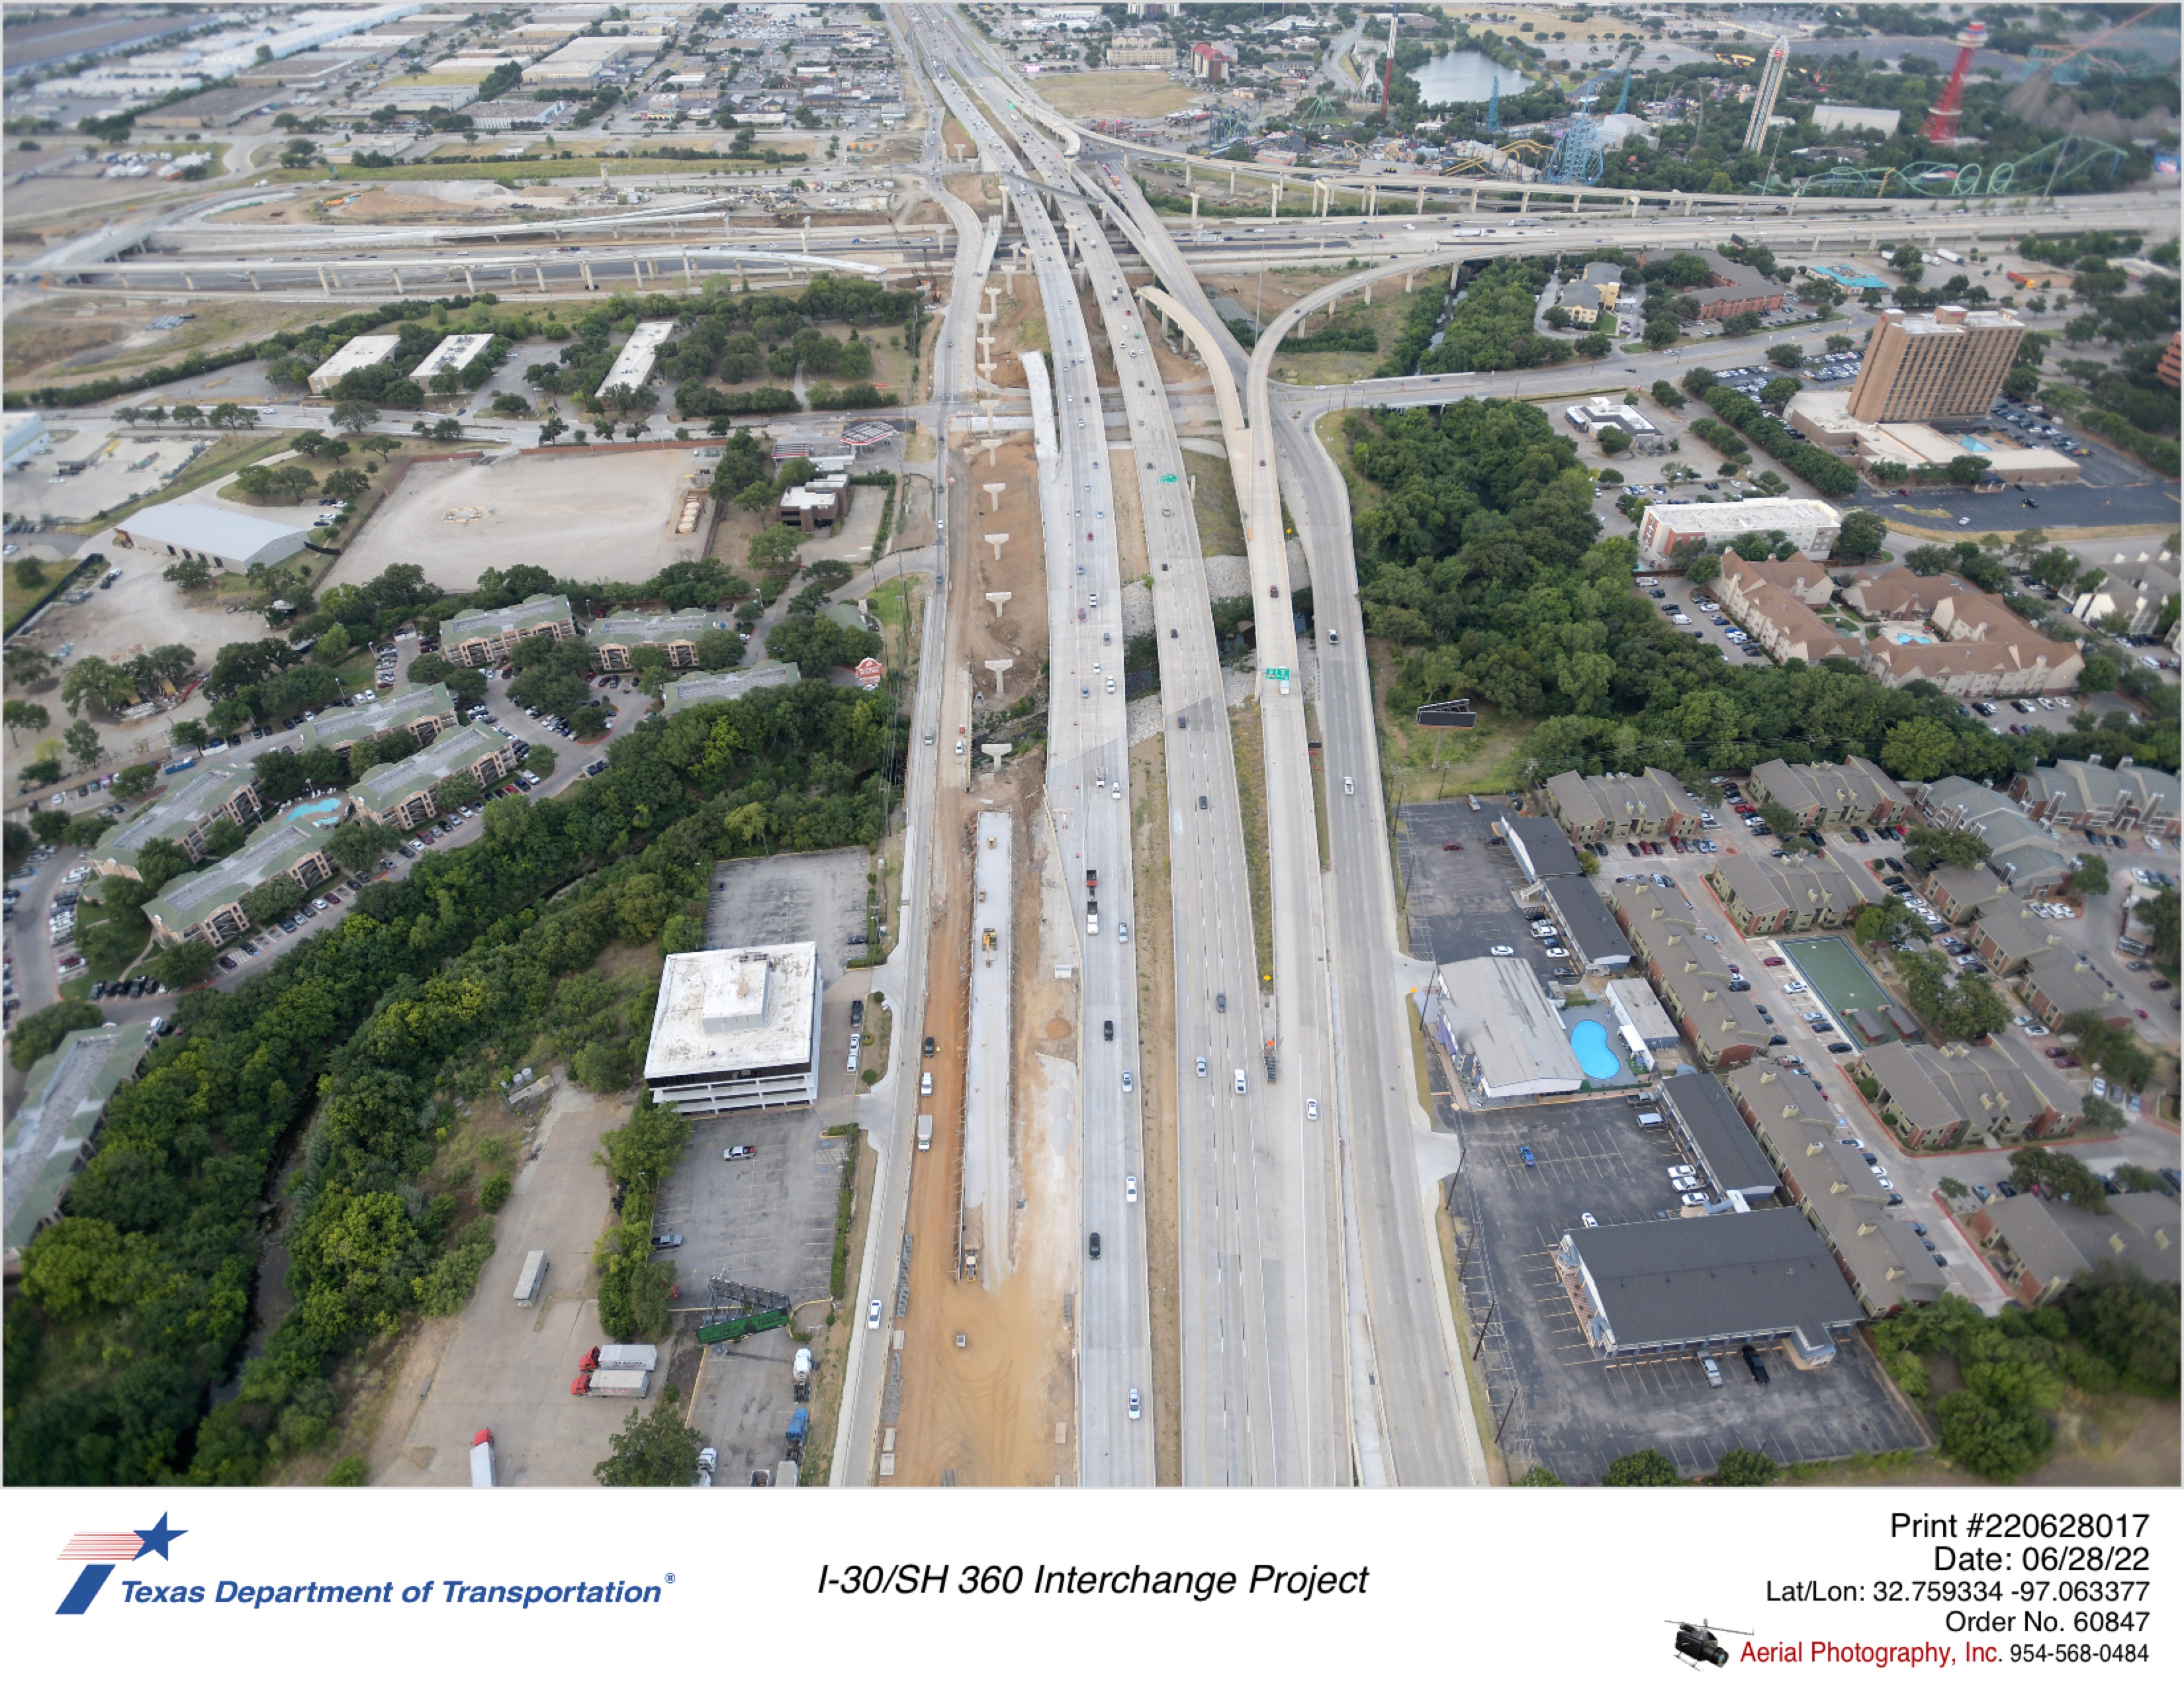 SH 360 looking south at I-30 interchange. Construction of northbound frontage road and direct connectors is shown.